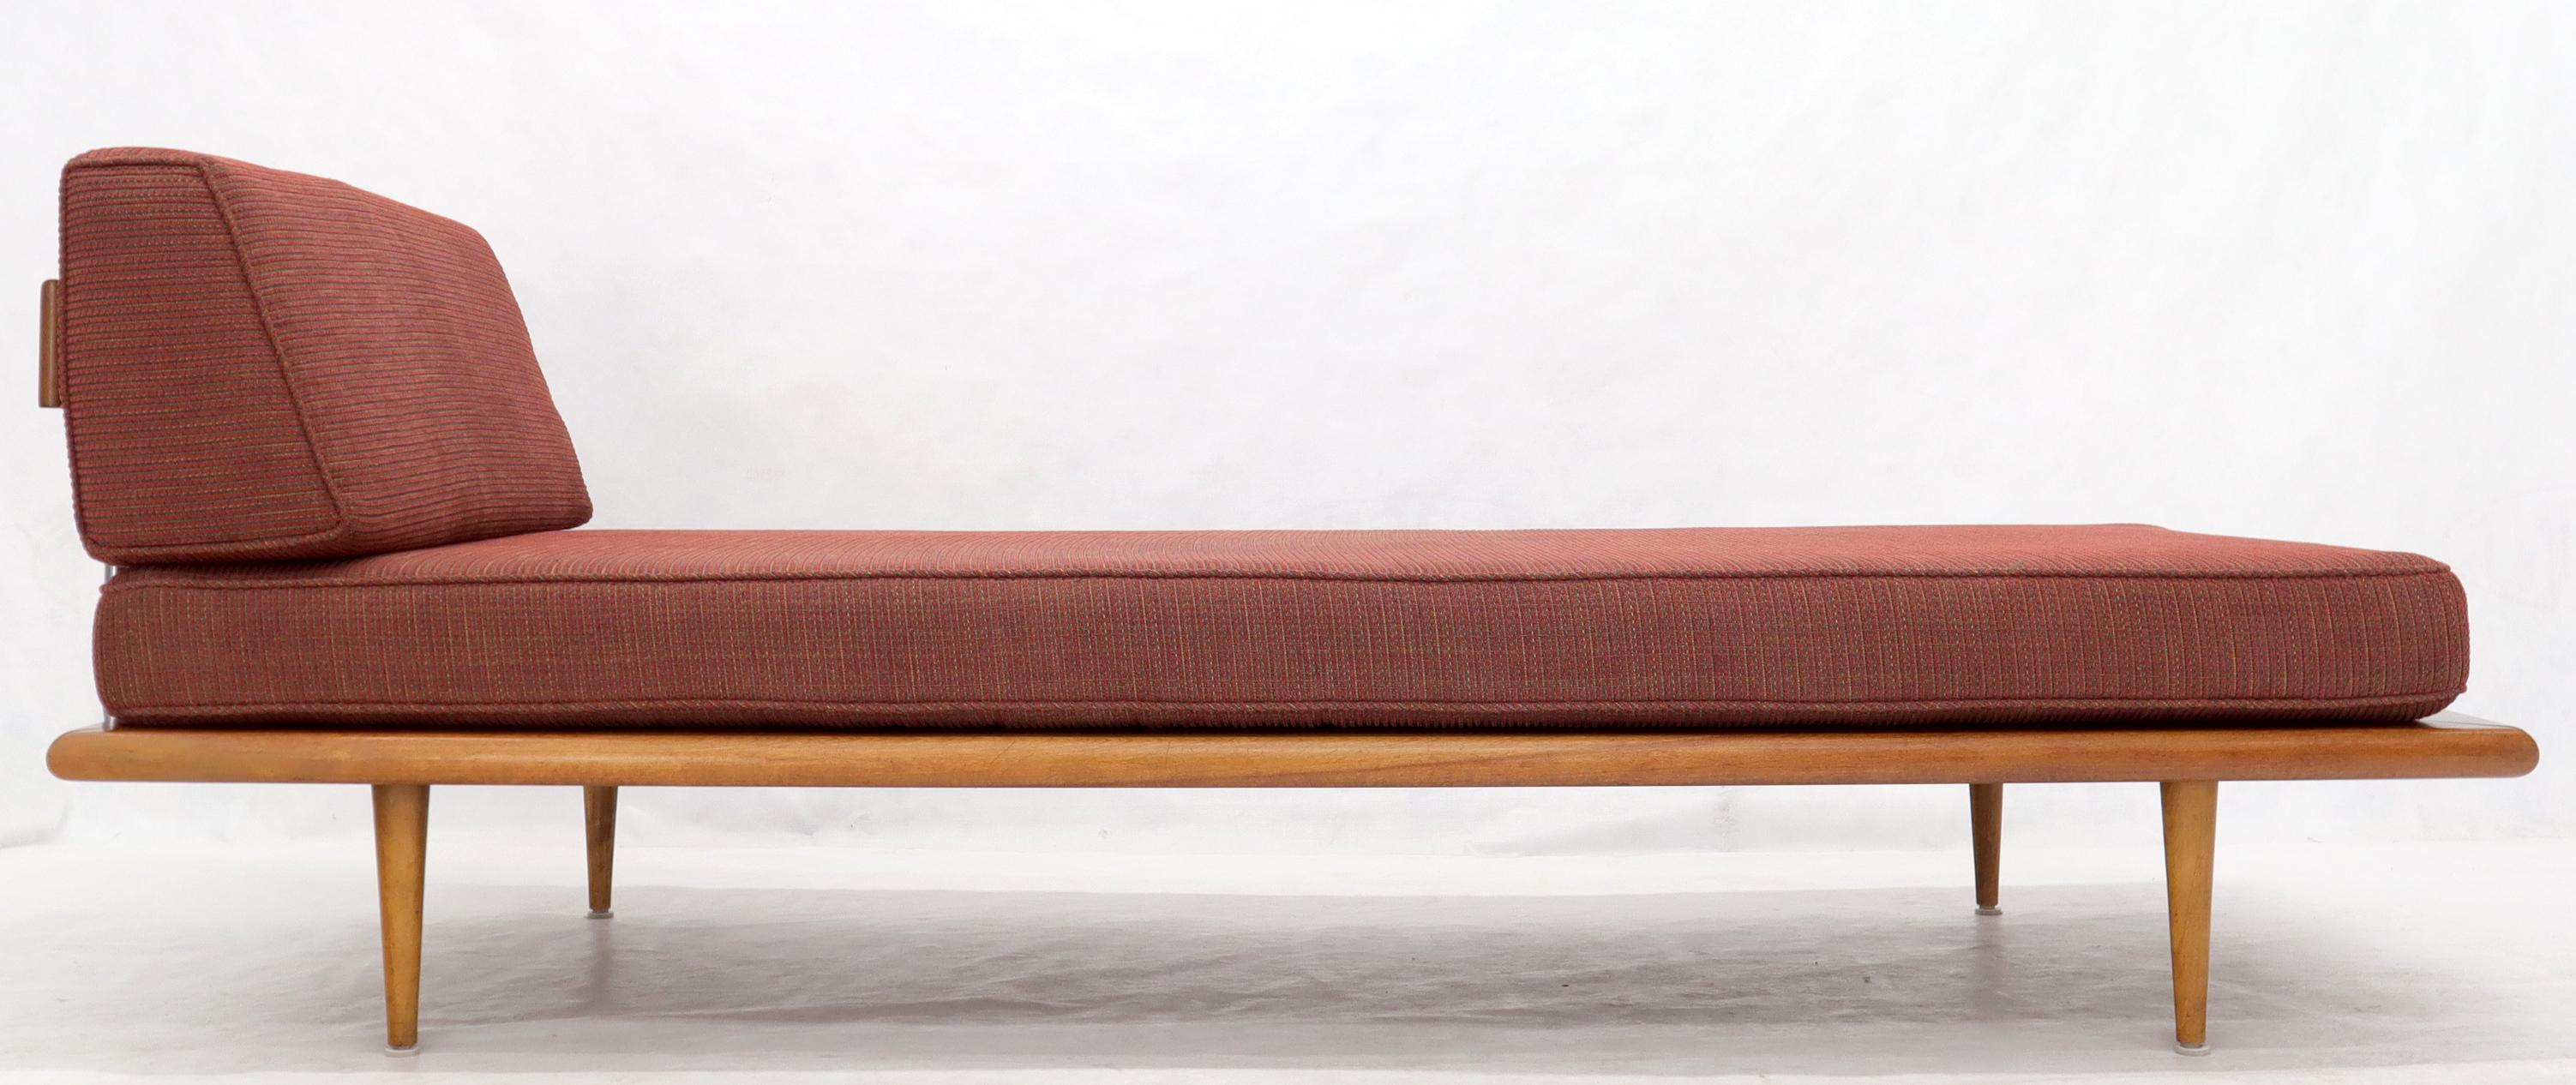 Vintage George Nelson für Herman Miller Daybed Cot Sofa Chaise Lounge 3